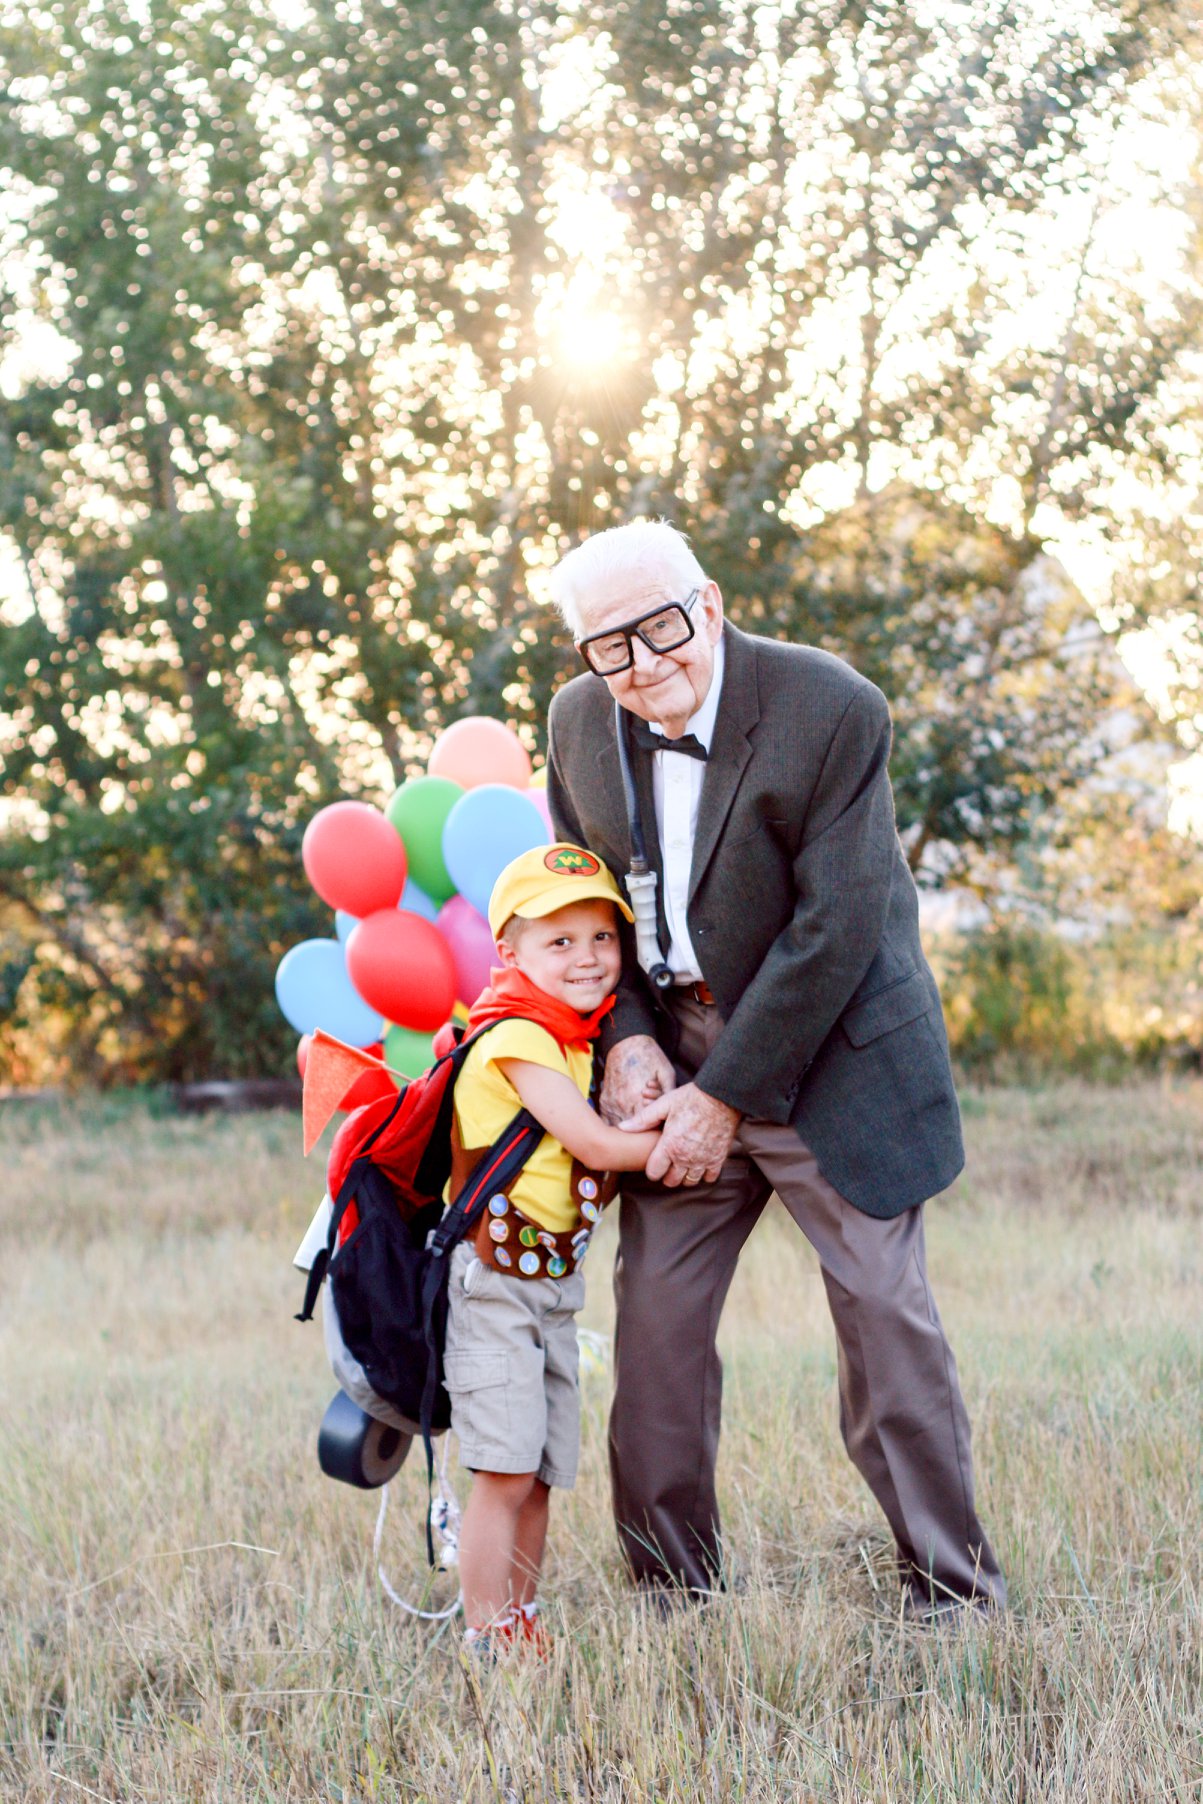 PHOTO: 5-year-old Elijah Perman poses next to his great-grandpa Richard in an 'Up'-themed photoshoot for his 5th birthday.